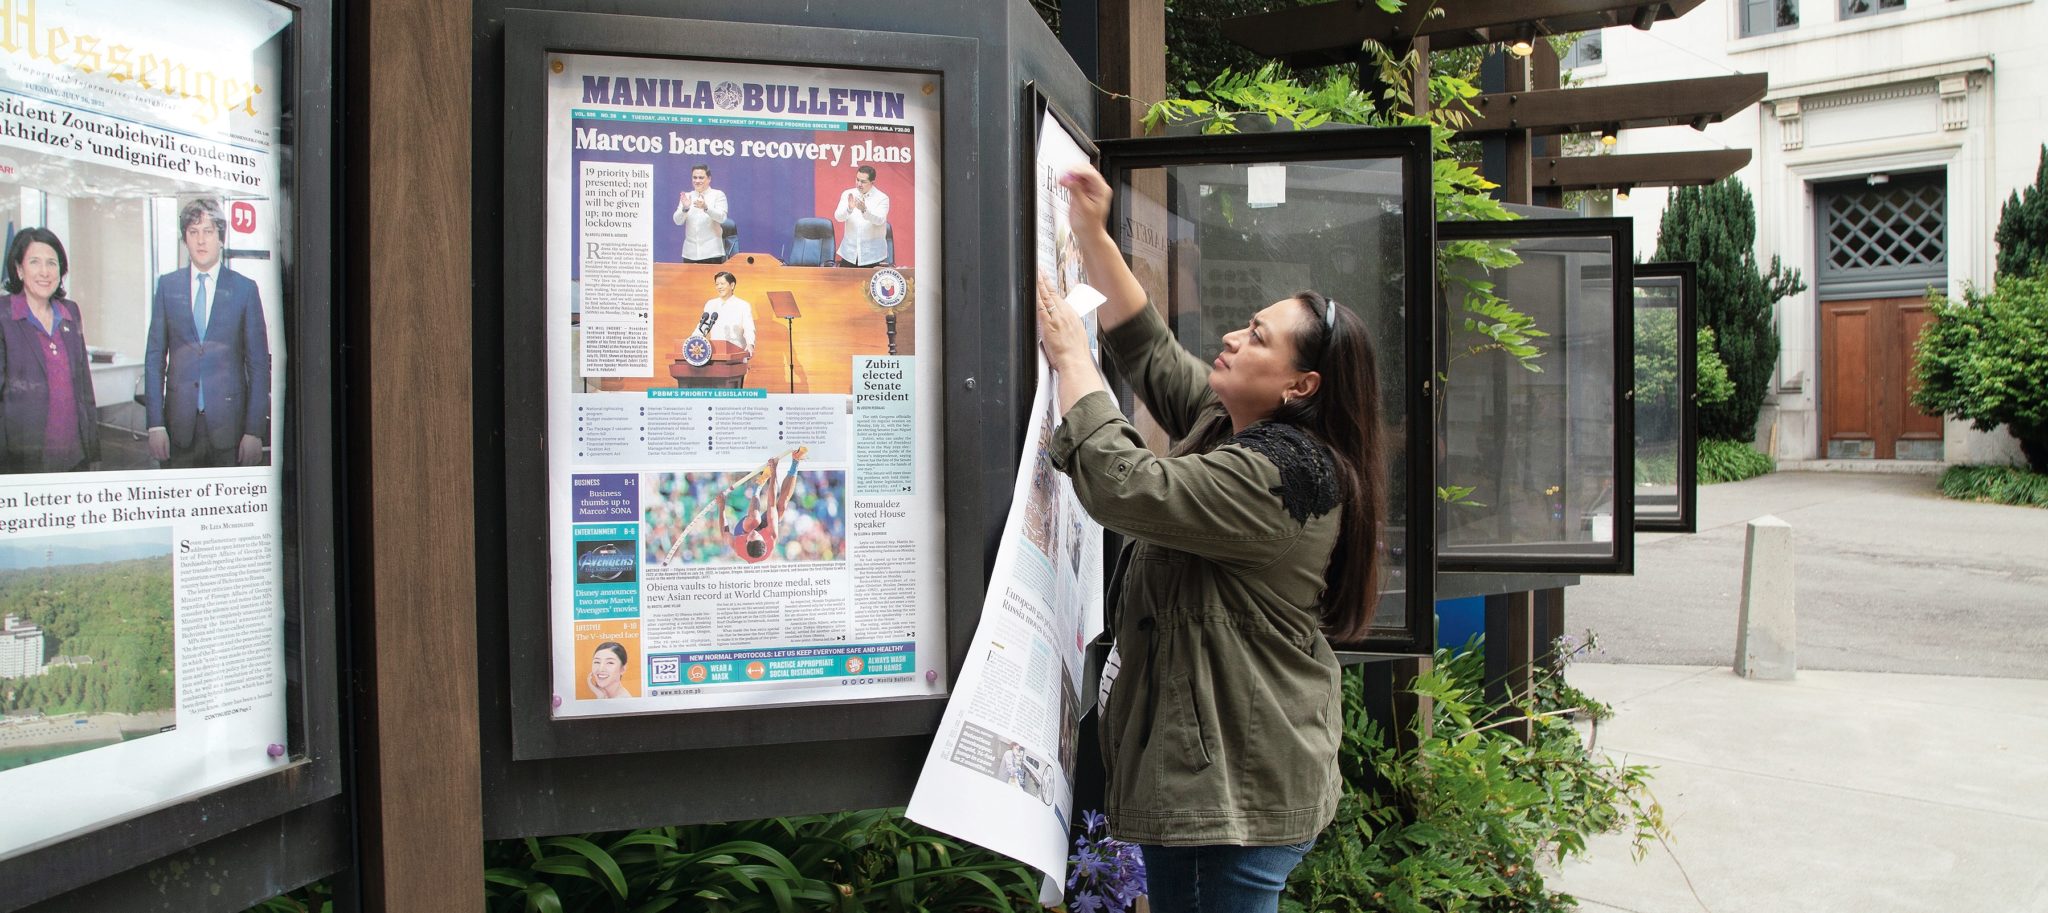 Woman puts up newspaper in display case